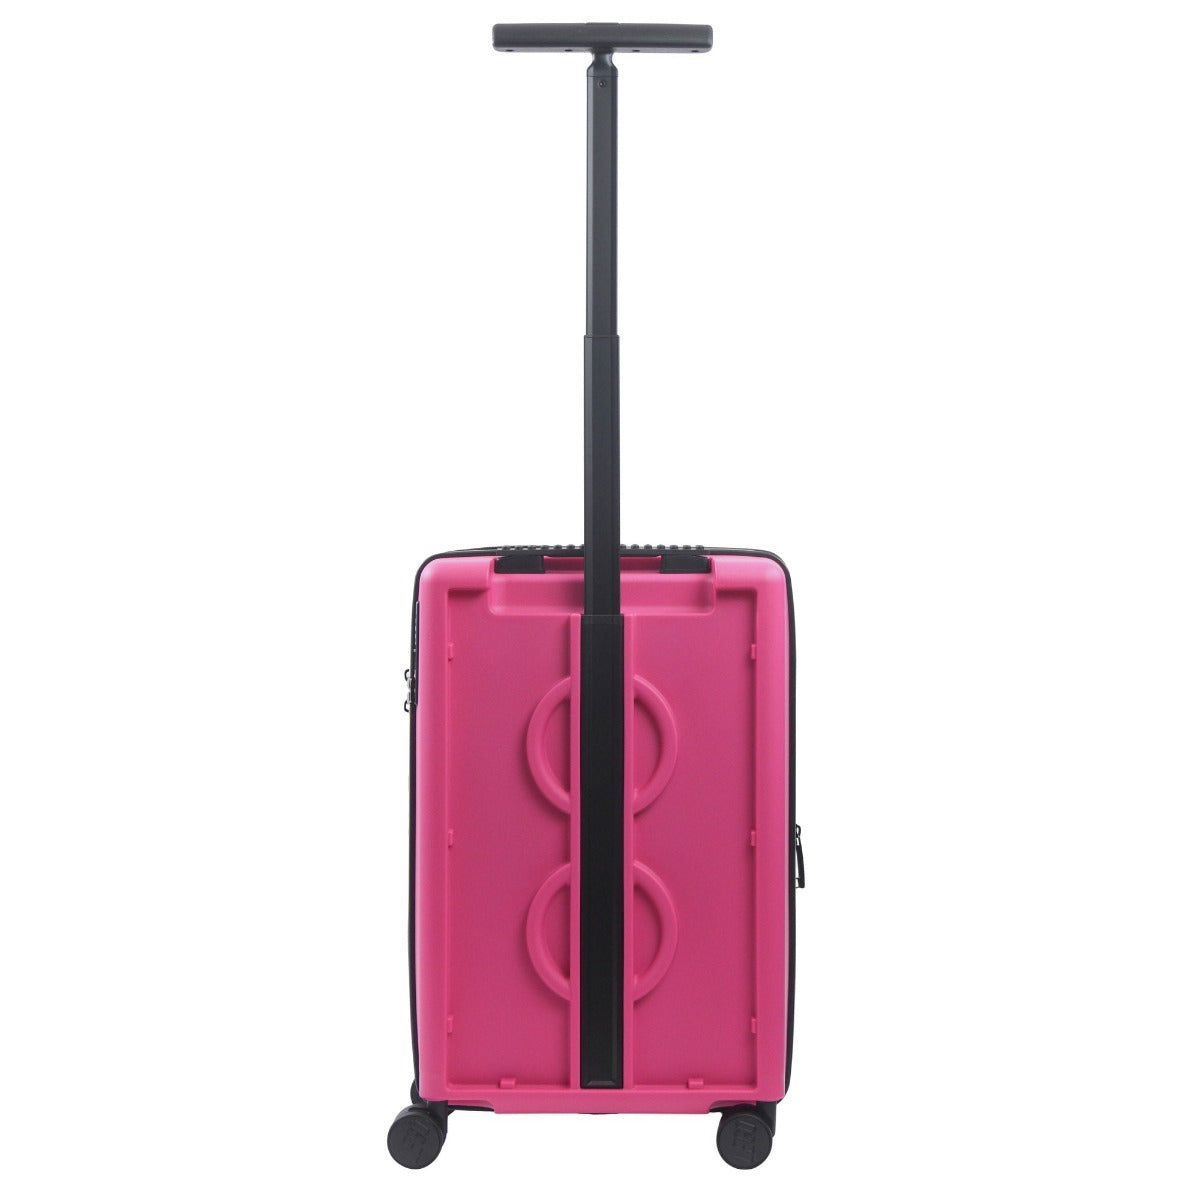 Pink Lego Signature Brick 2X3 trolley expandable 22-inch carry-on rolling luggage